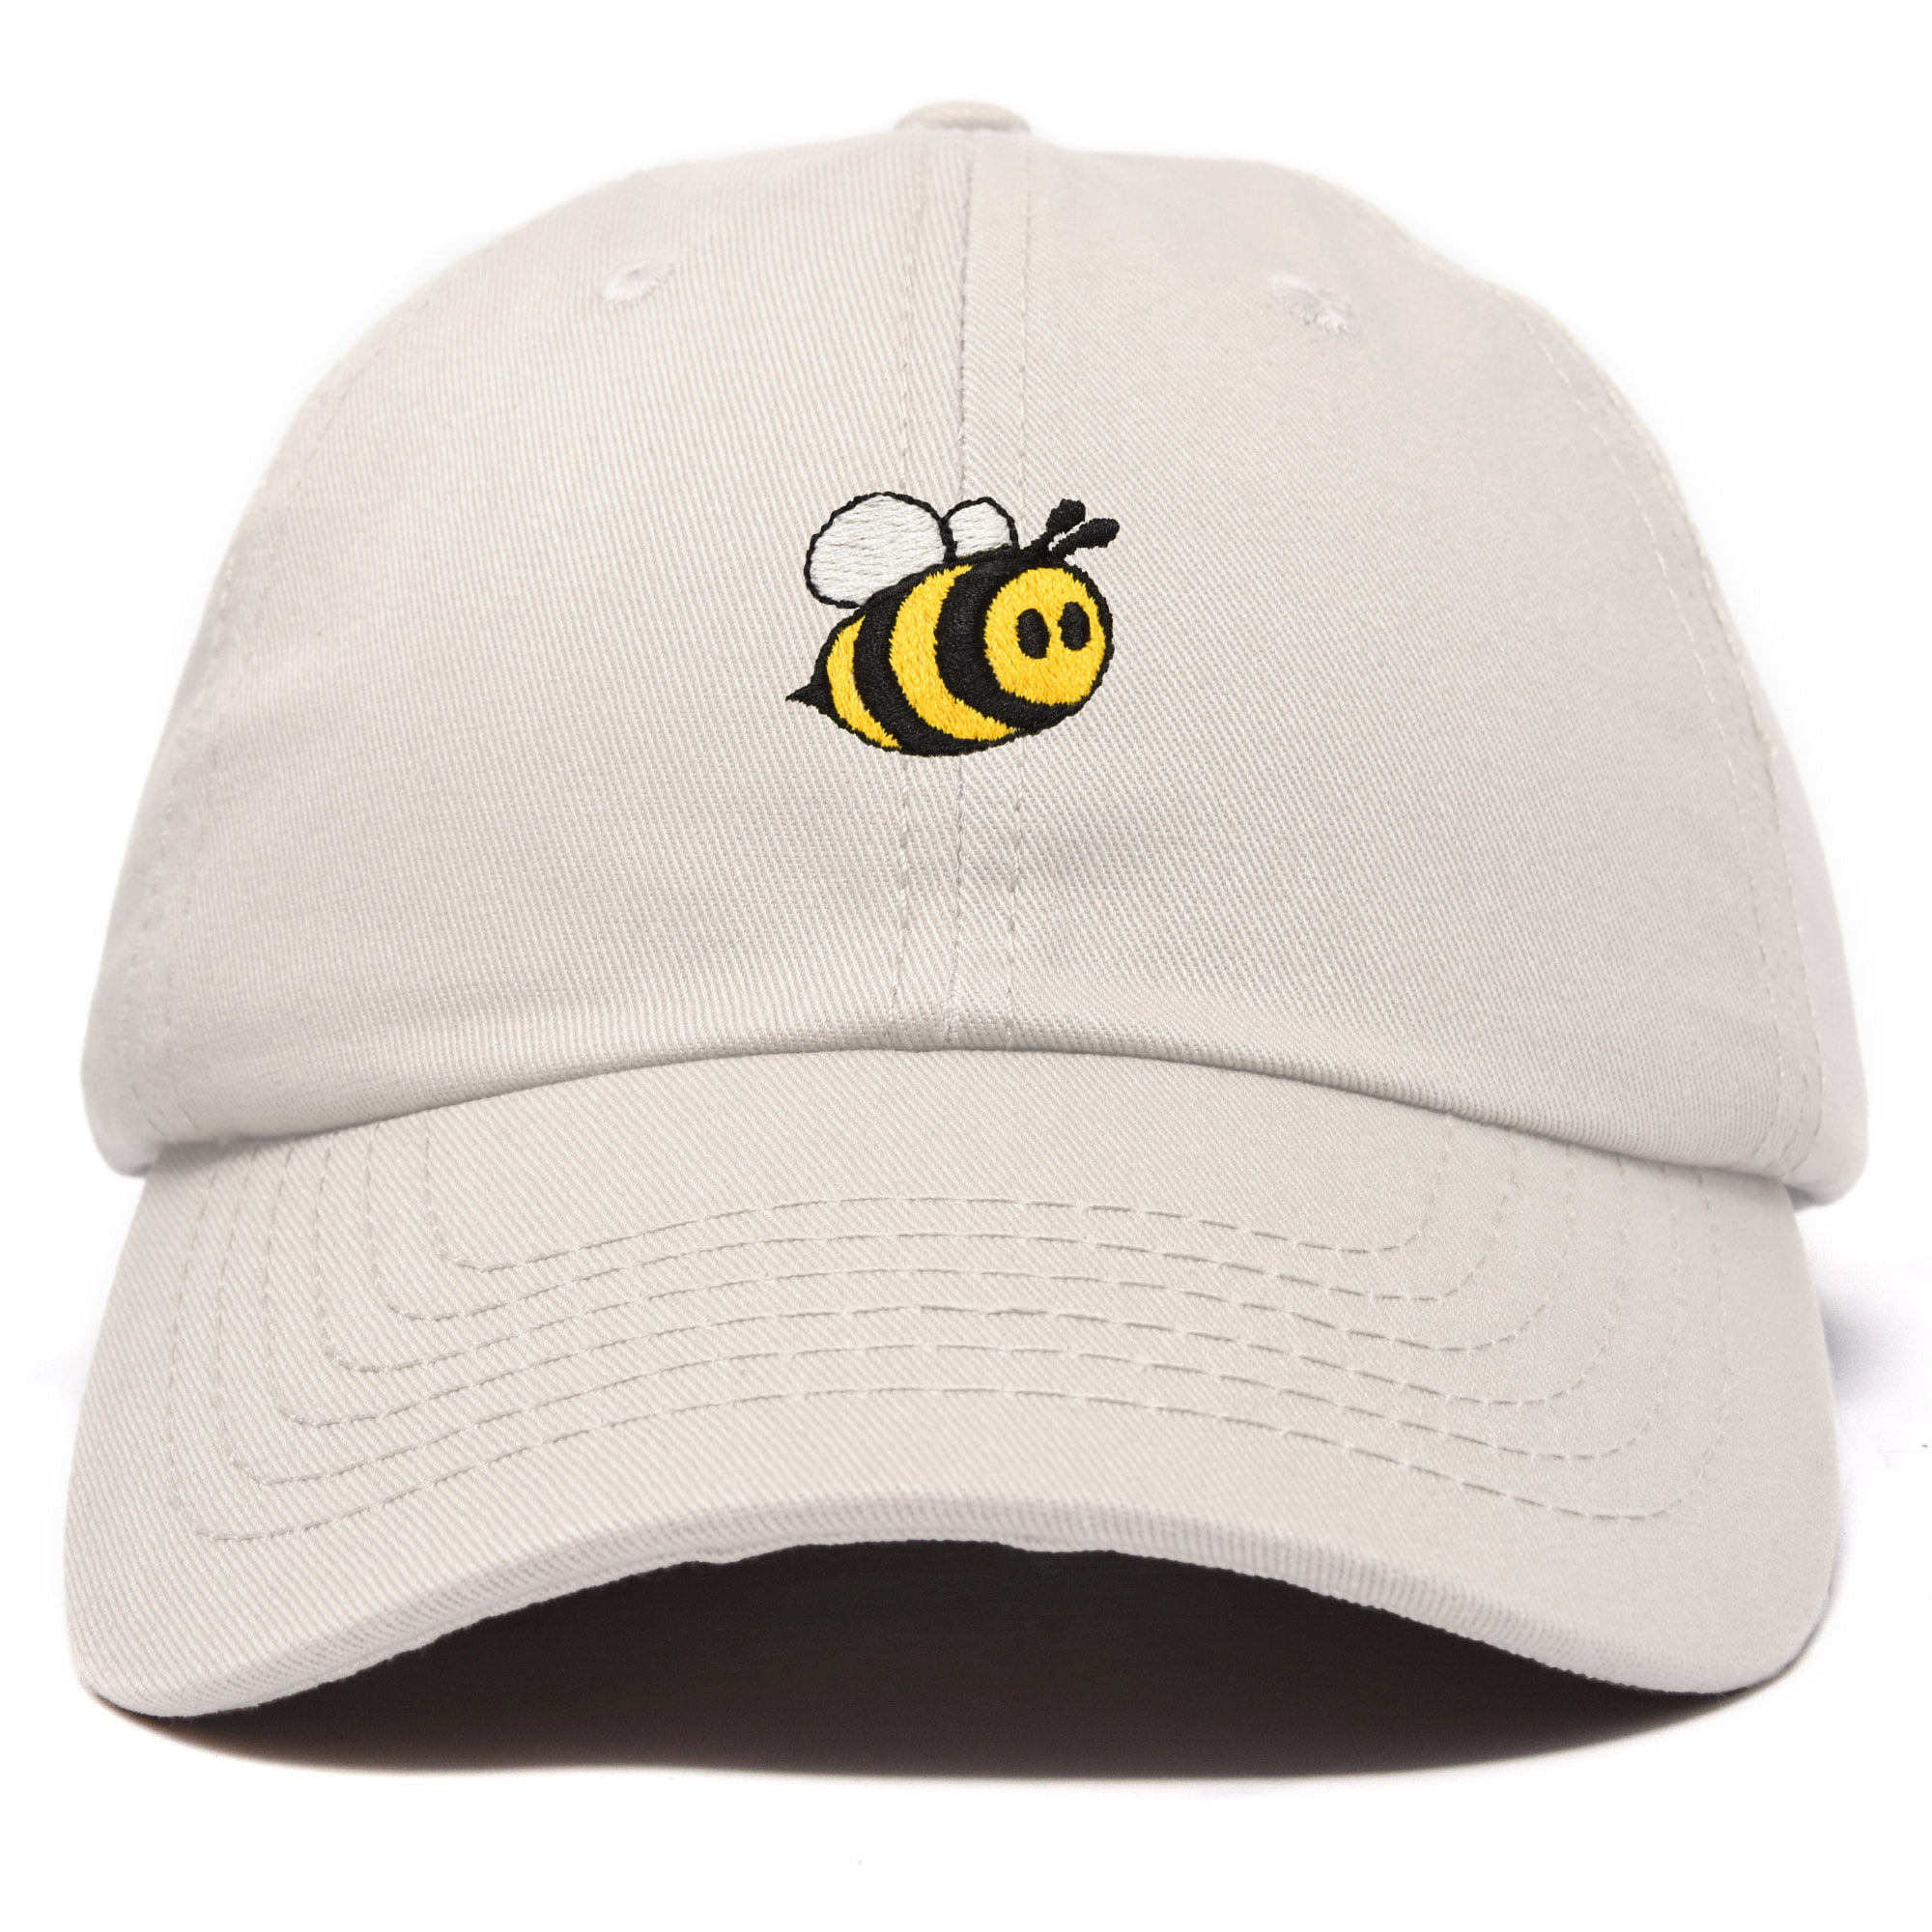 DALIX Bumble Bee Baseball Cap Dad Hat Embroidered Womens Girls in Beige ...